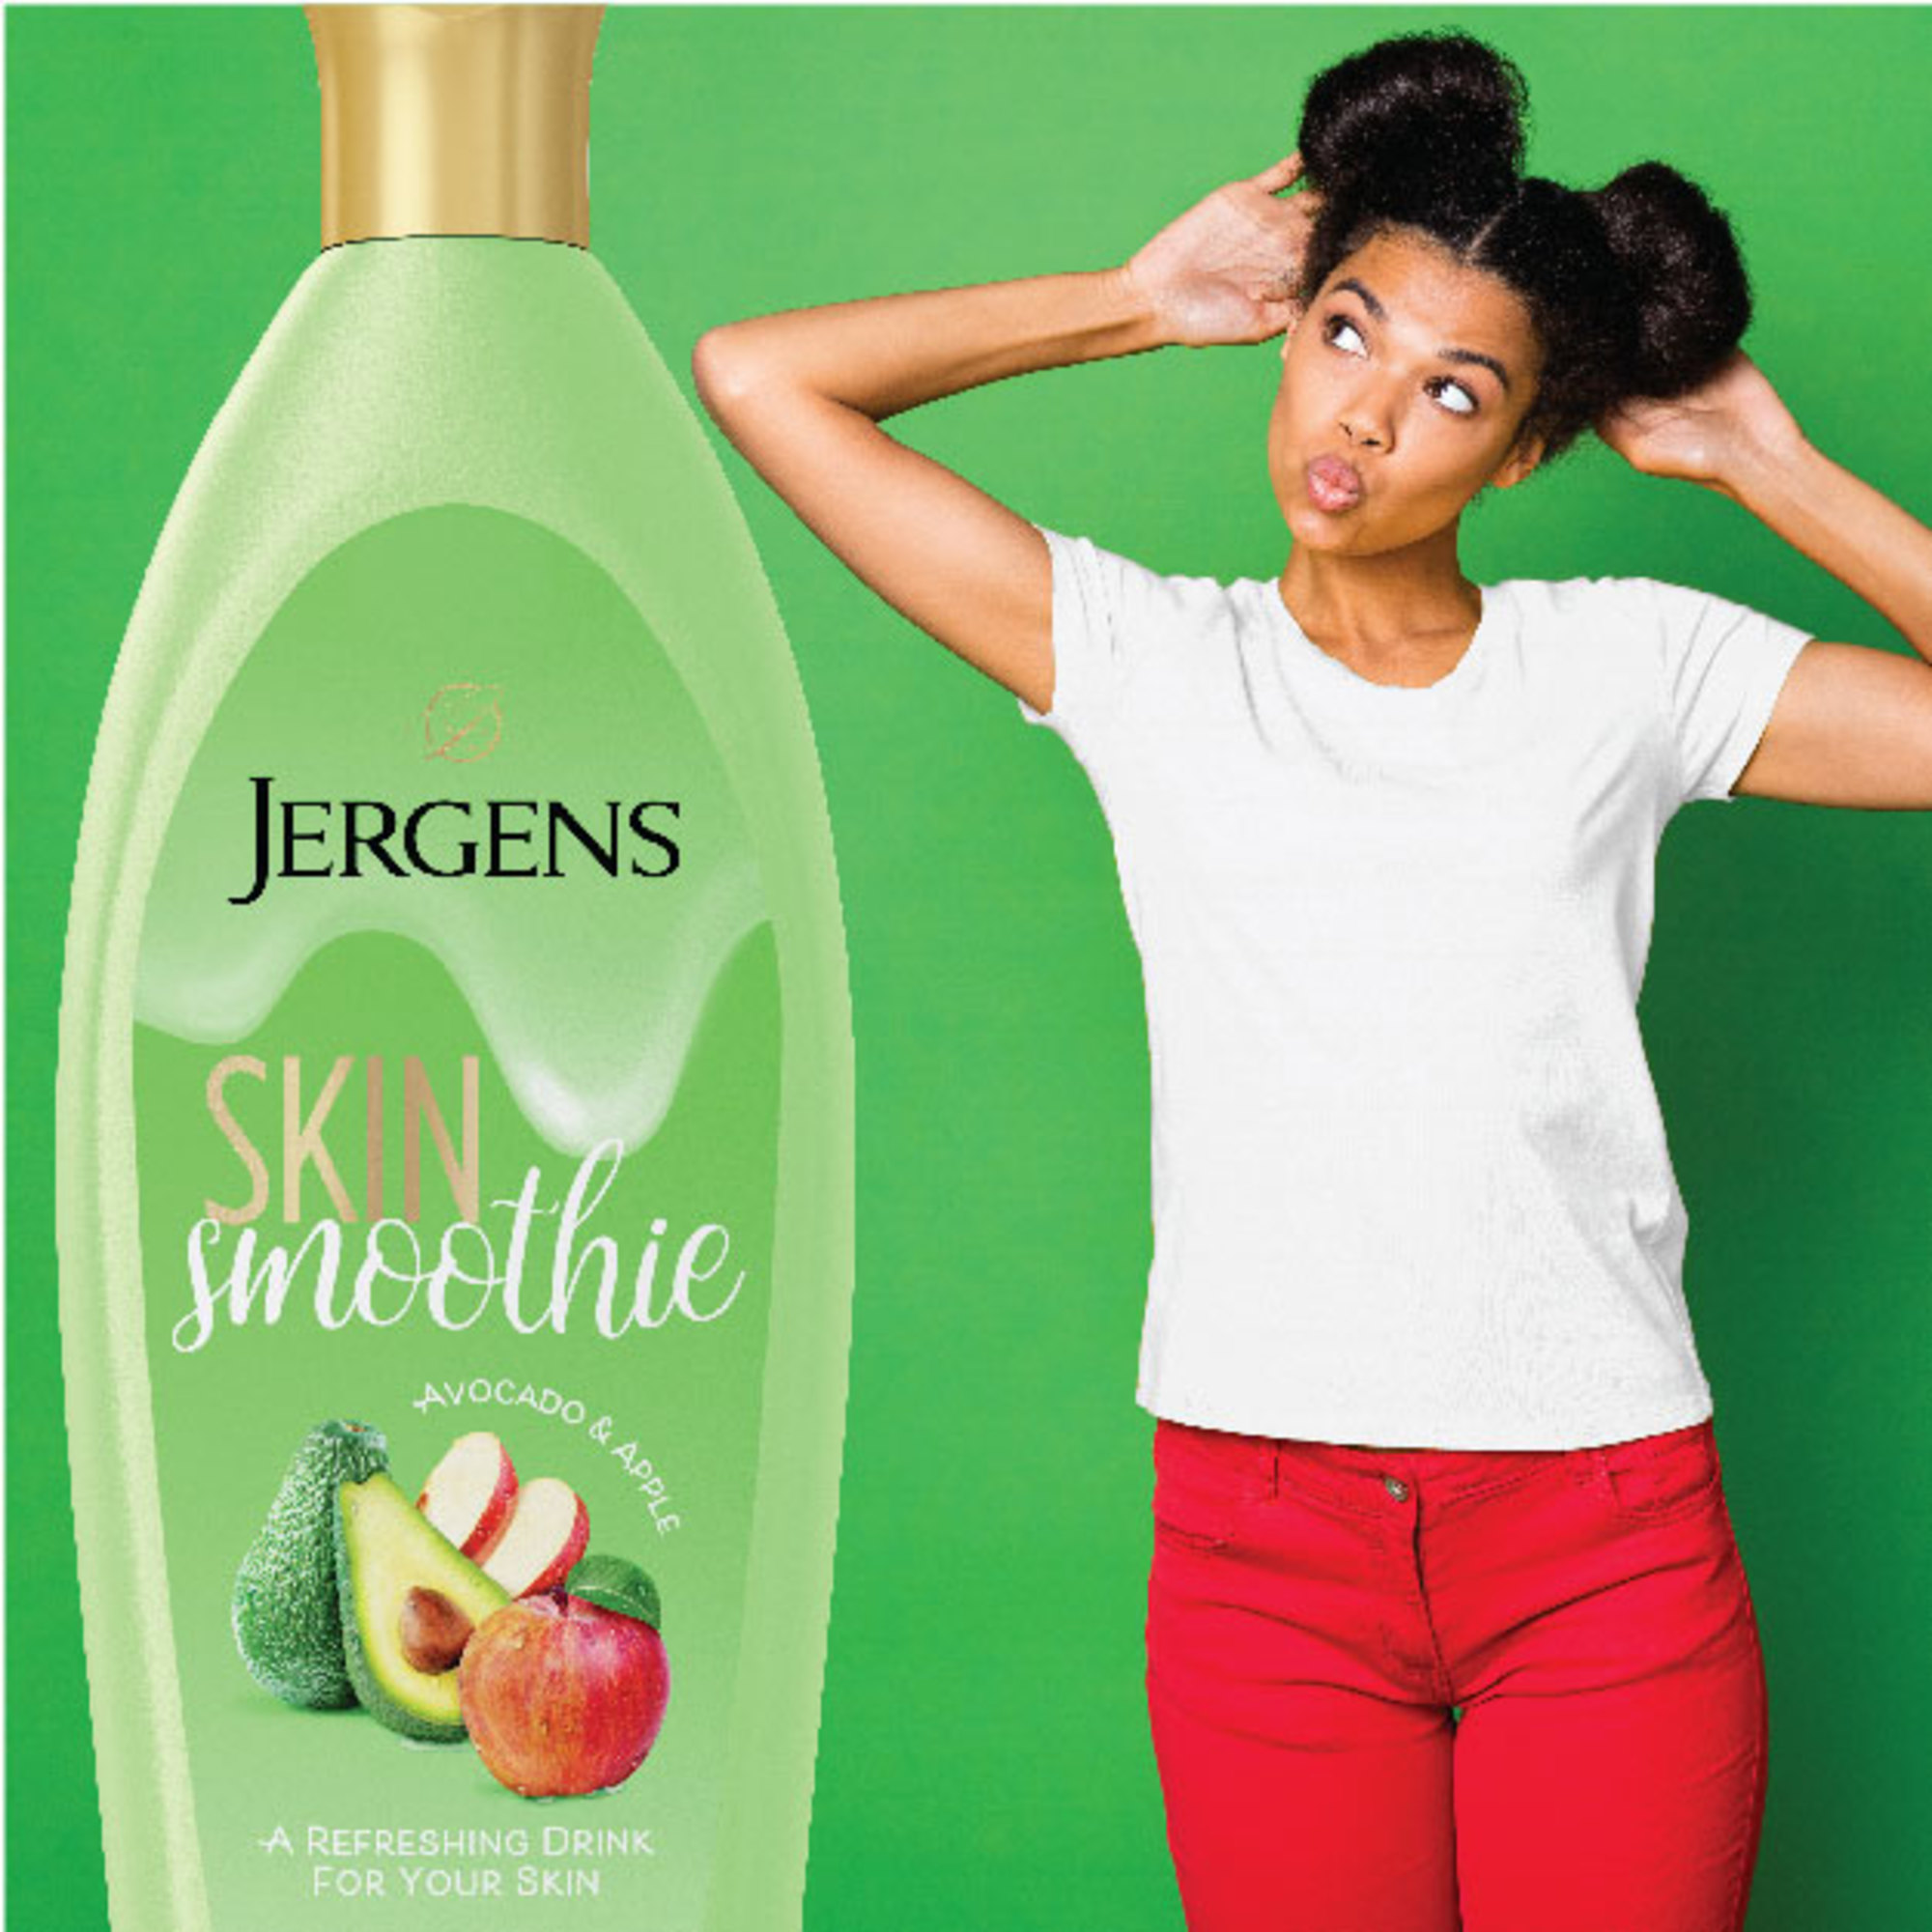 Jergens Skin Smoothie Avocado & Apple Scented Body Lotion, 10 fl oz - image 4 of 11